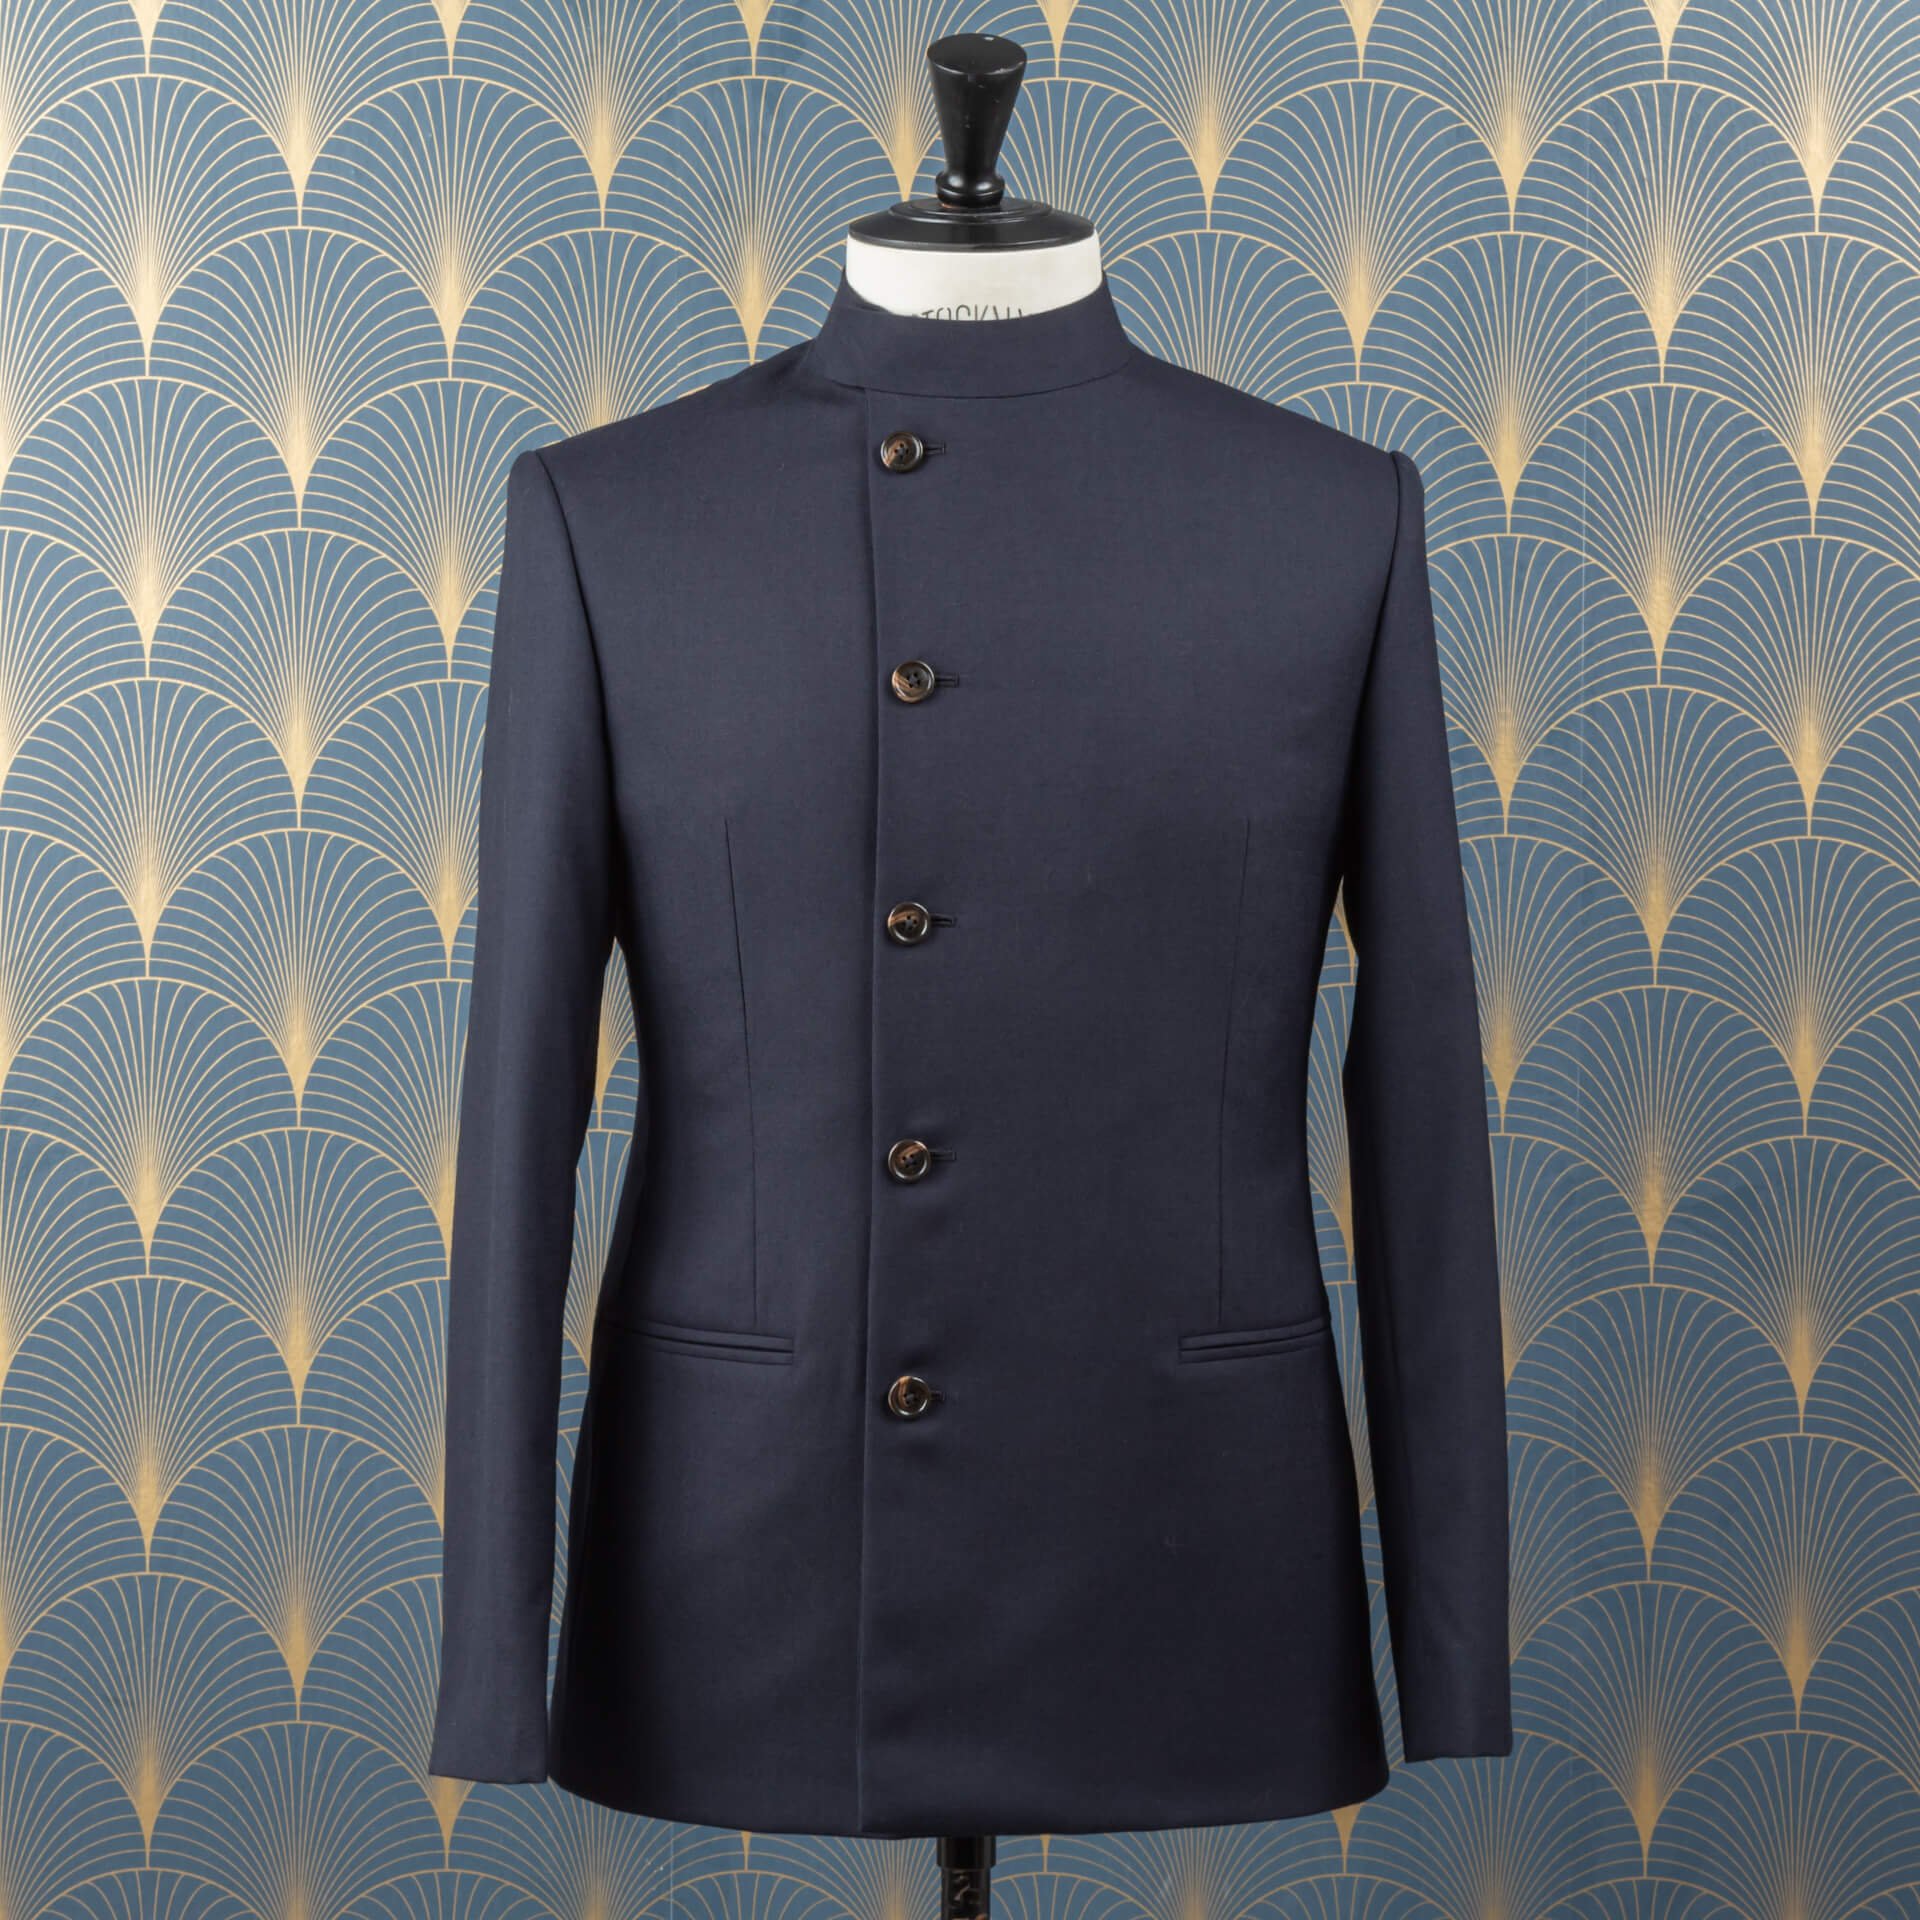 Orchestra Attire Bespoke Jacket with stand up collar